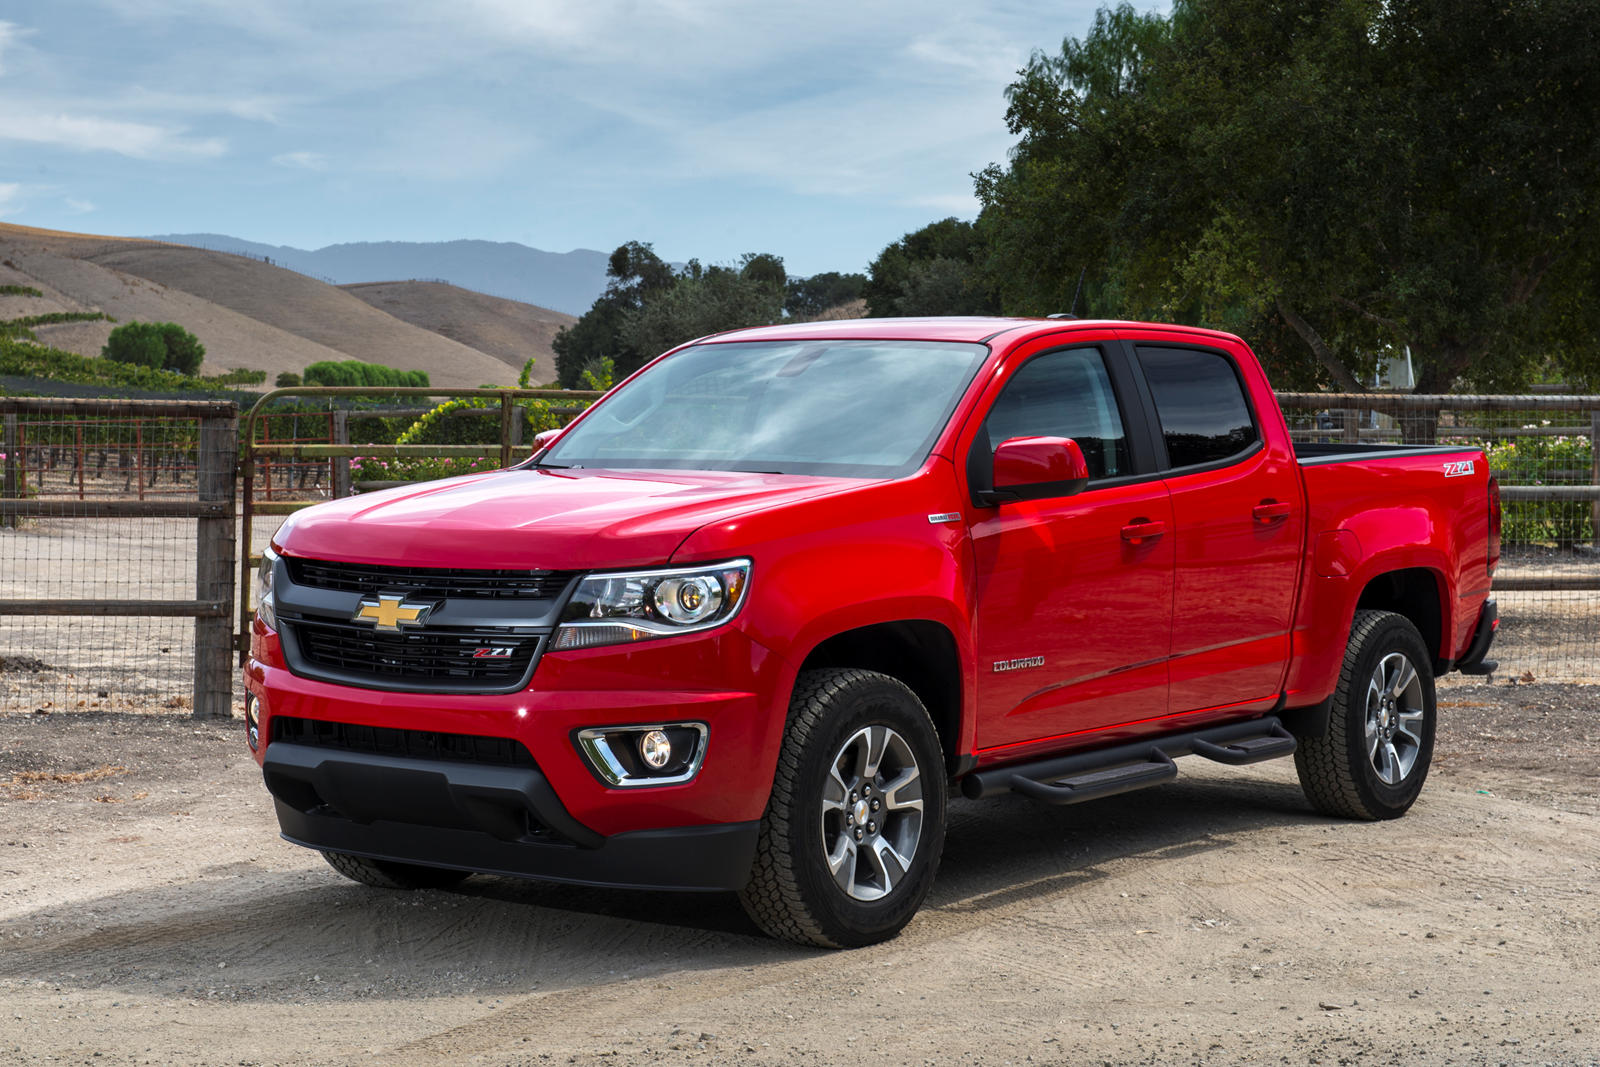 Used 2nd Generation Chevrolet Colorado For Sale.